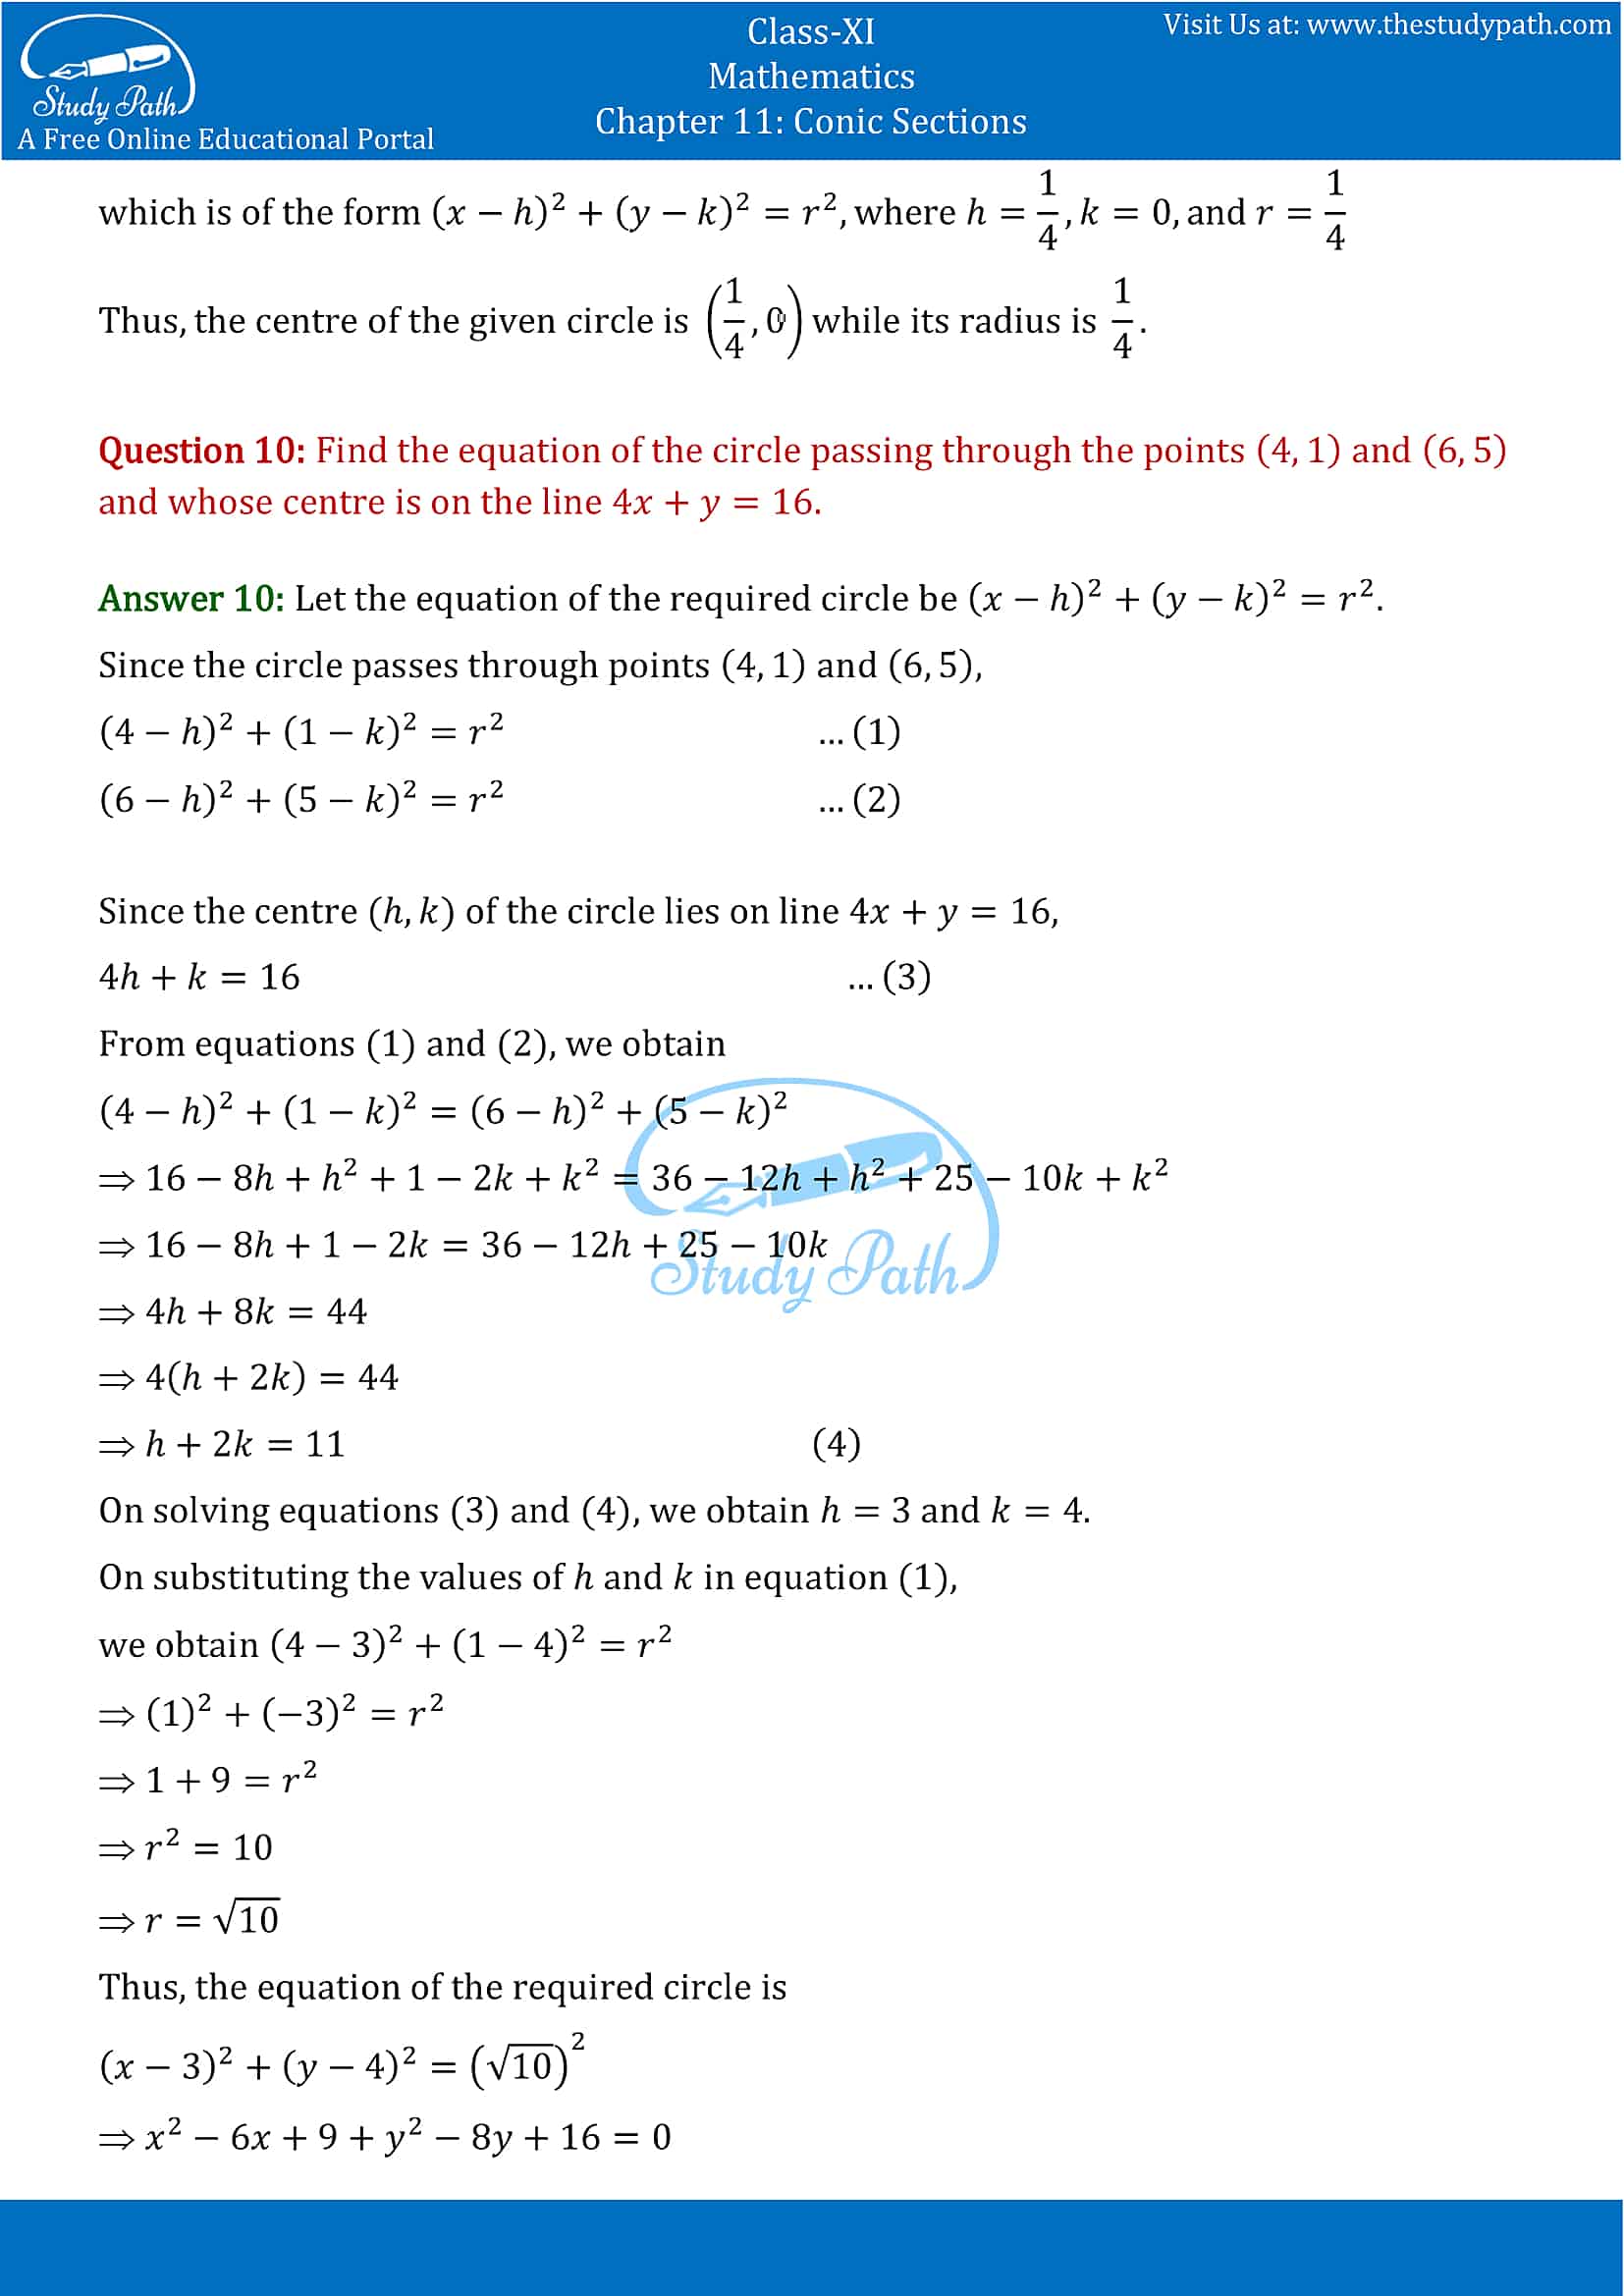 NCERT Solutions for Class 11 Maths chapter 11 Conic Section Exercise 11.1 Part-4